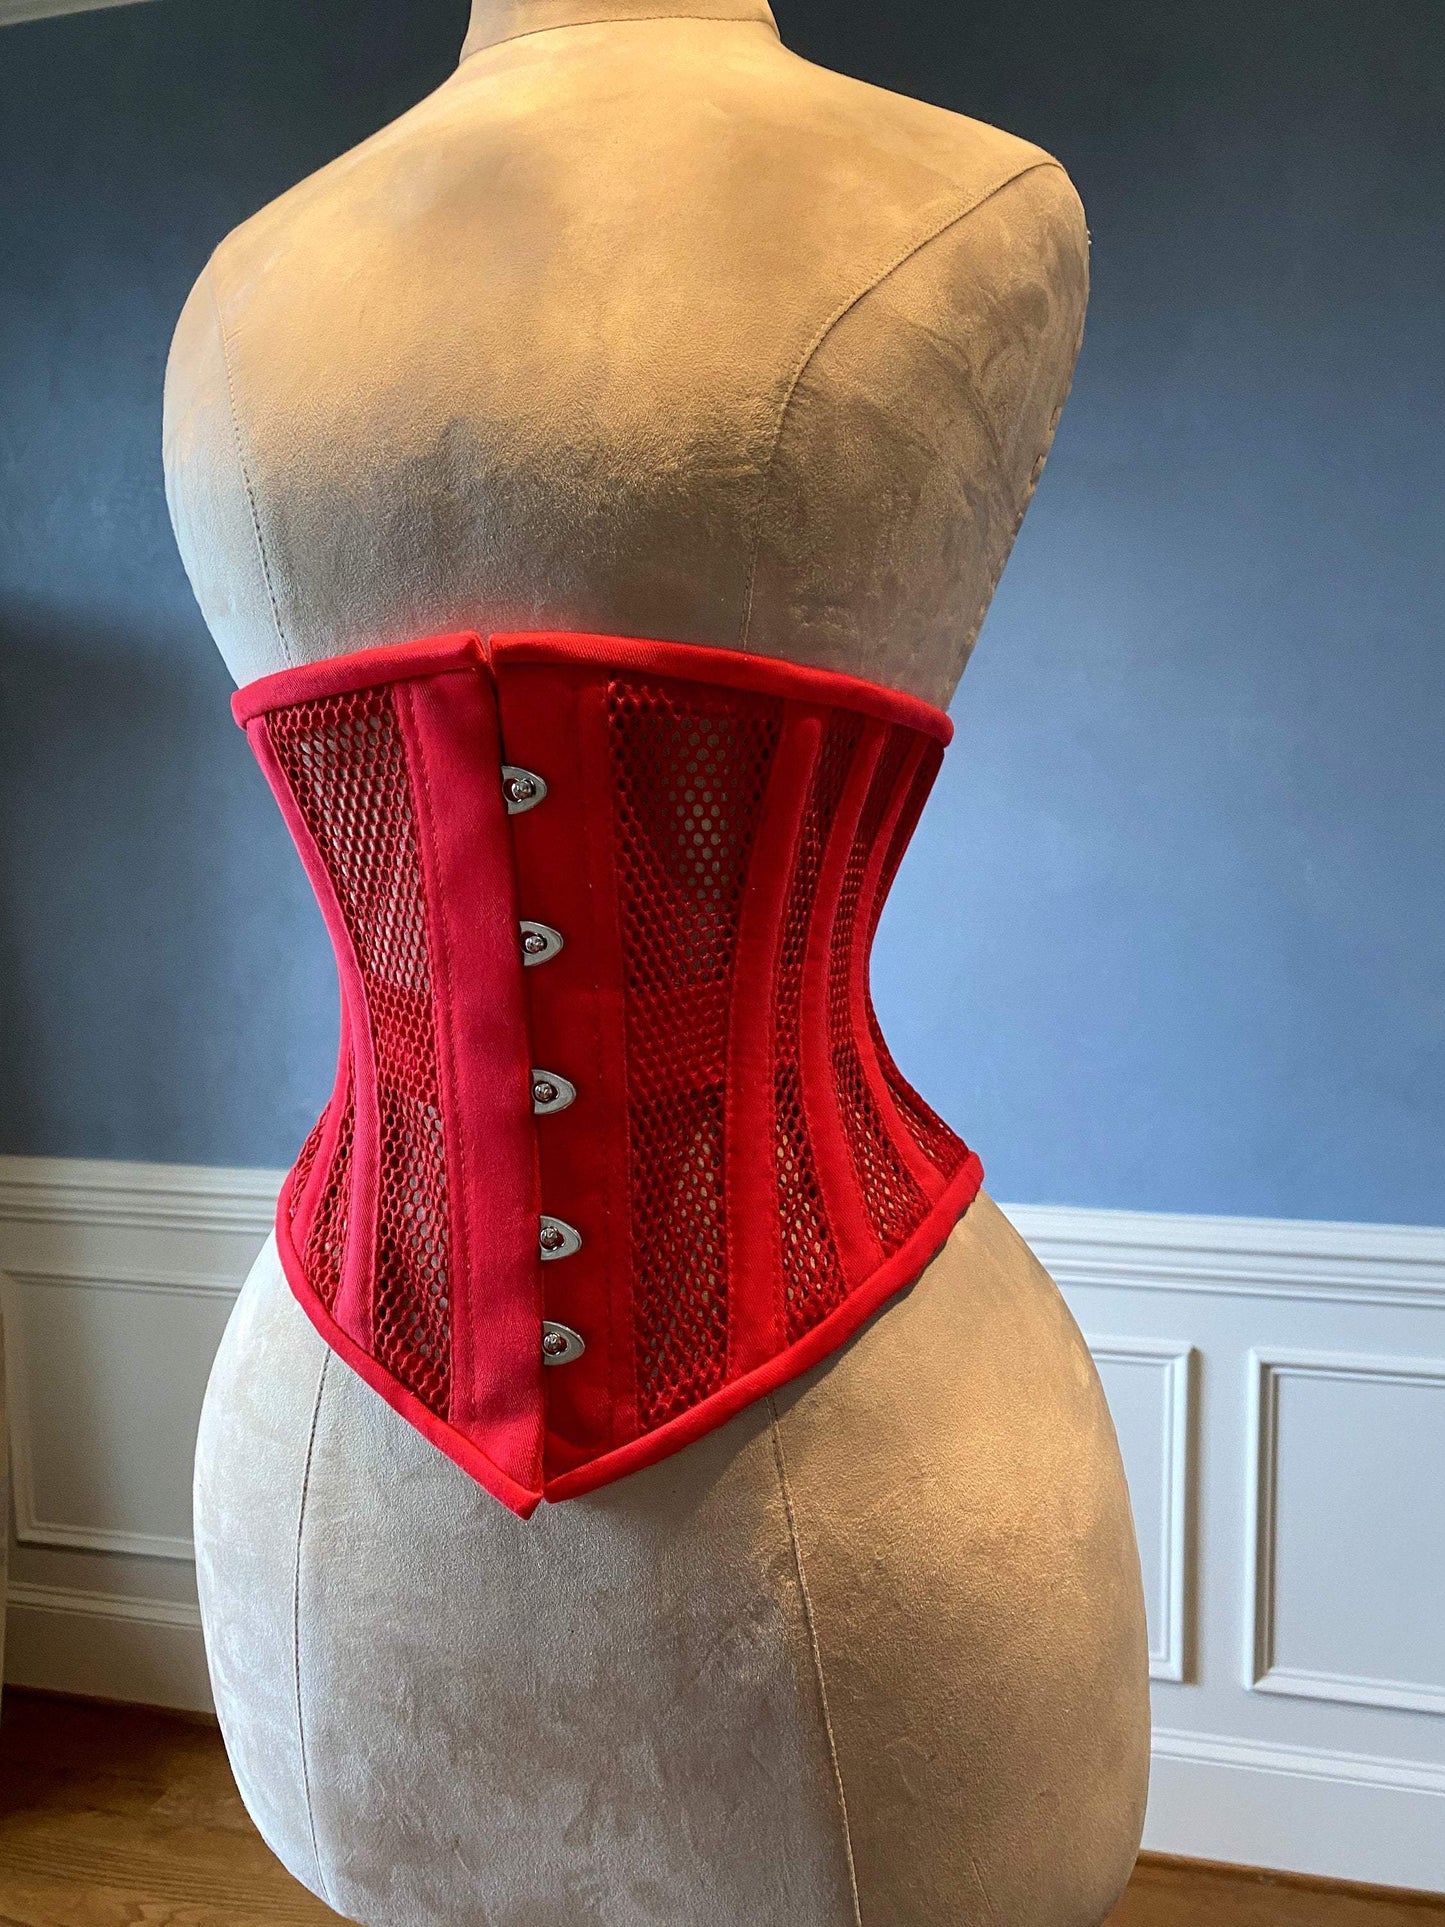 Real steel boned underbust underwear red corset from transparent mesh –  Corsettery Authentic Corsets USA